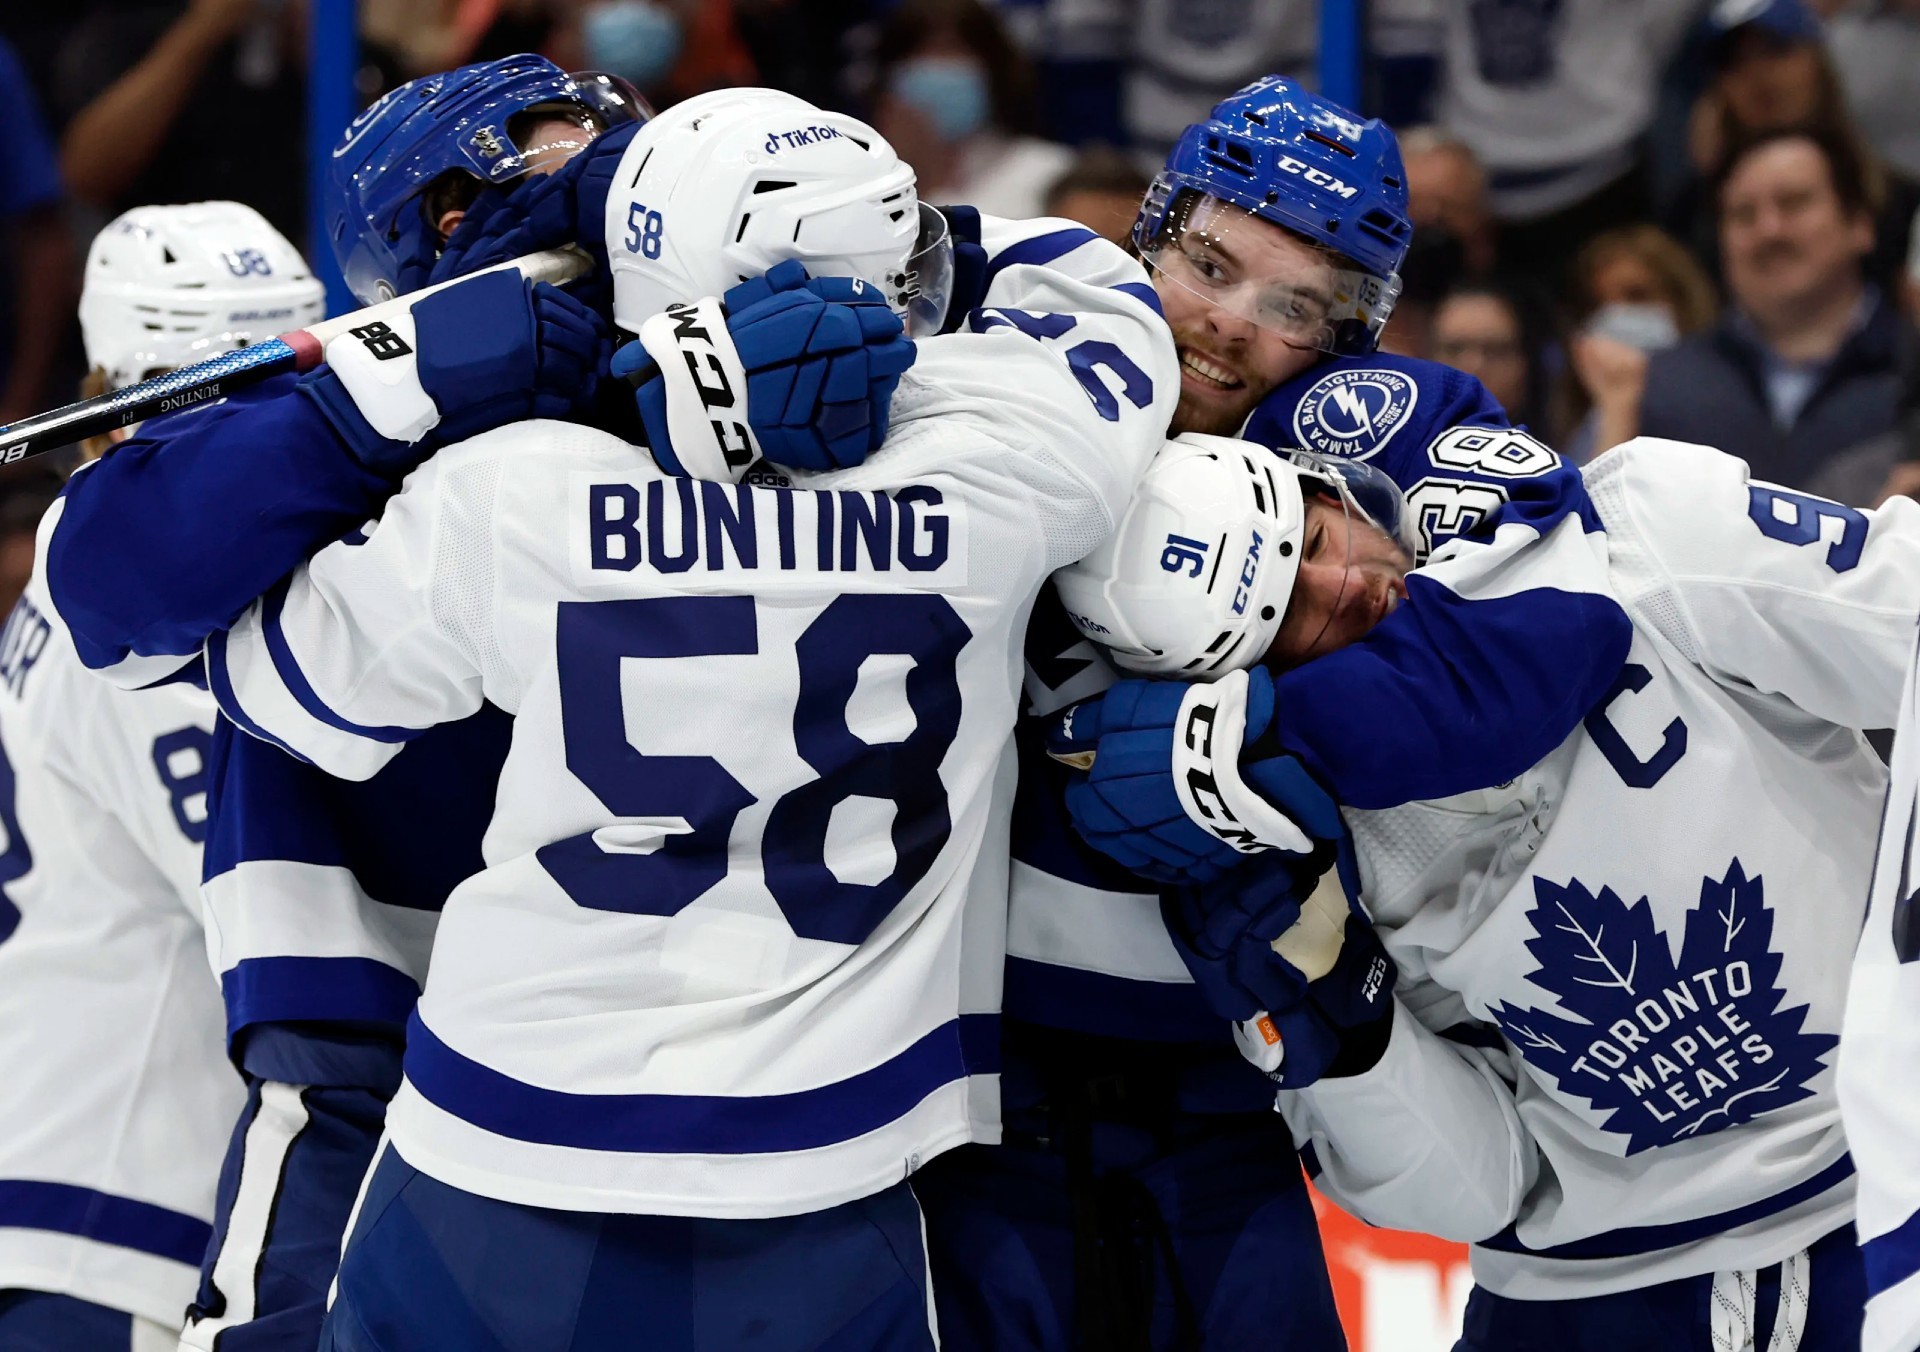 Better Know the 202122 Tampa Bay Lightning Playoff series storylines